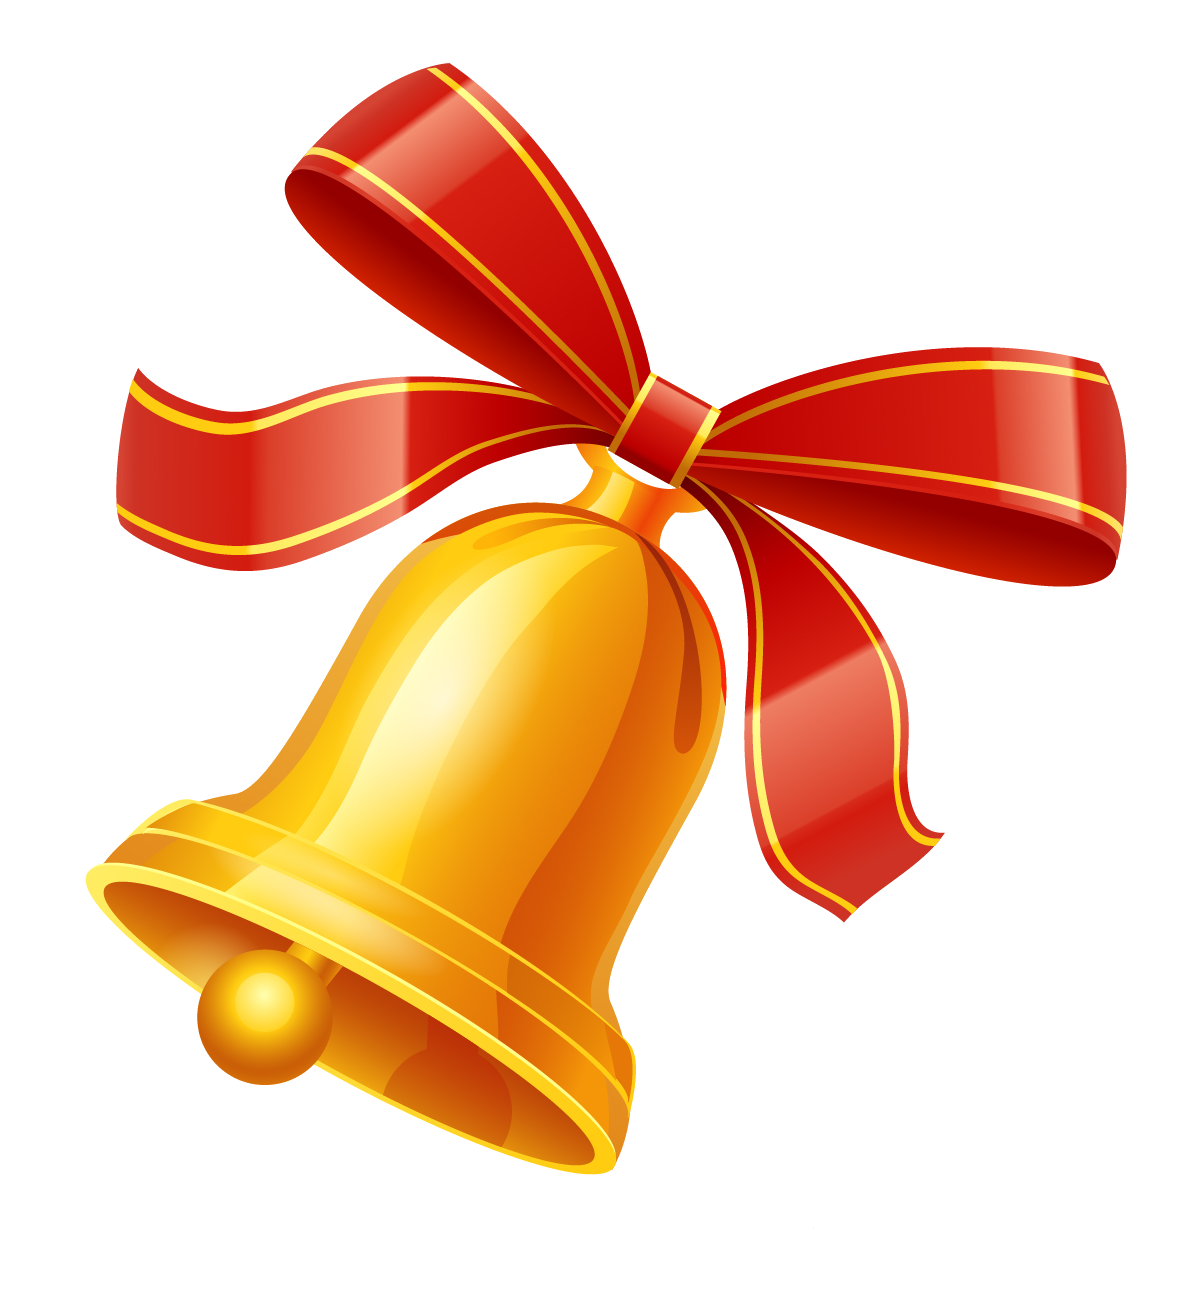 Christmas Bell Images PNG Transparent Background, Free Download #30821 -  FreeIconsPNG